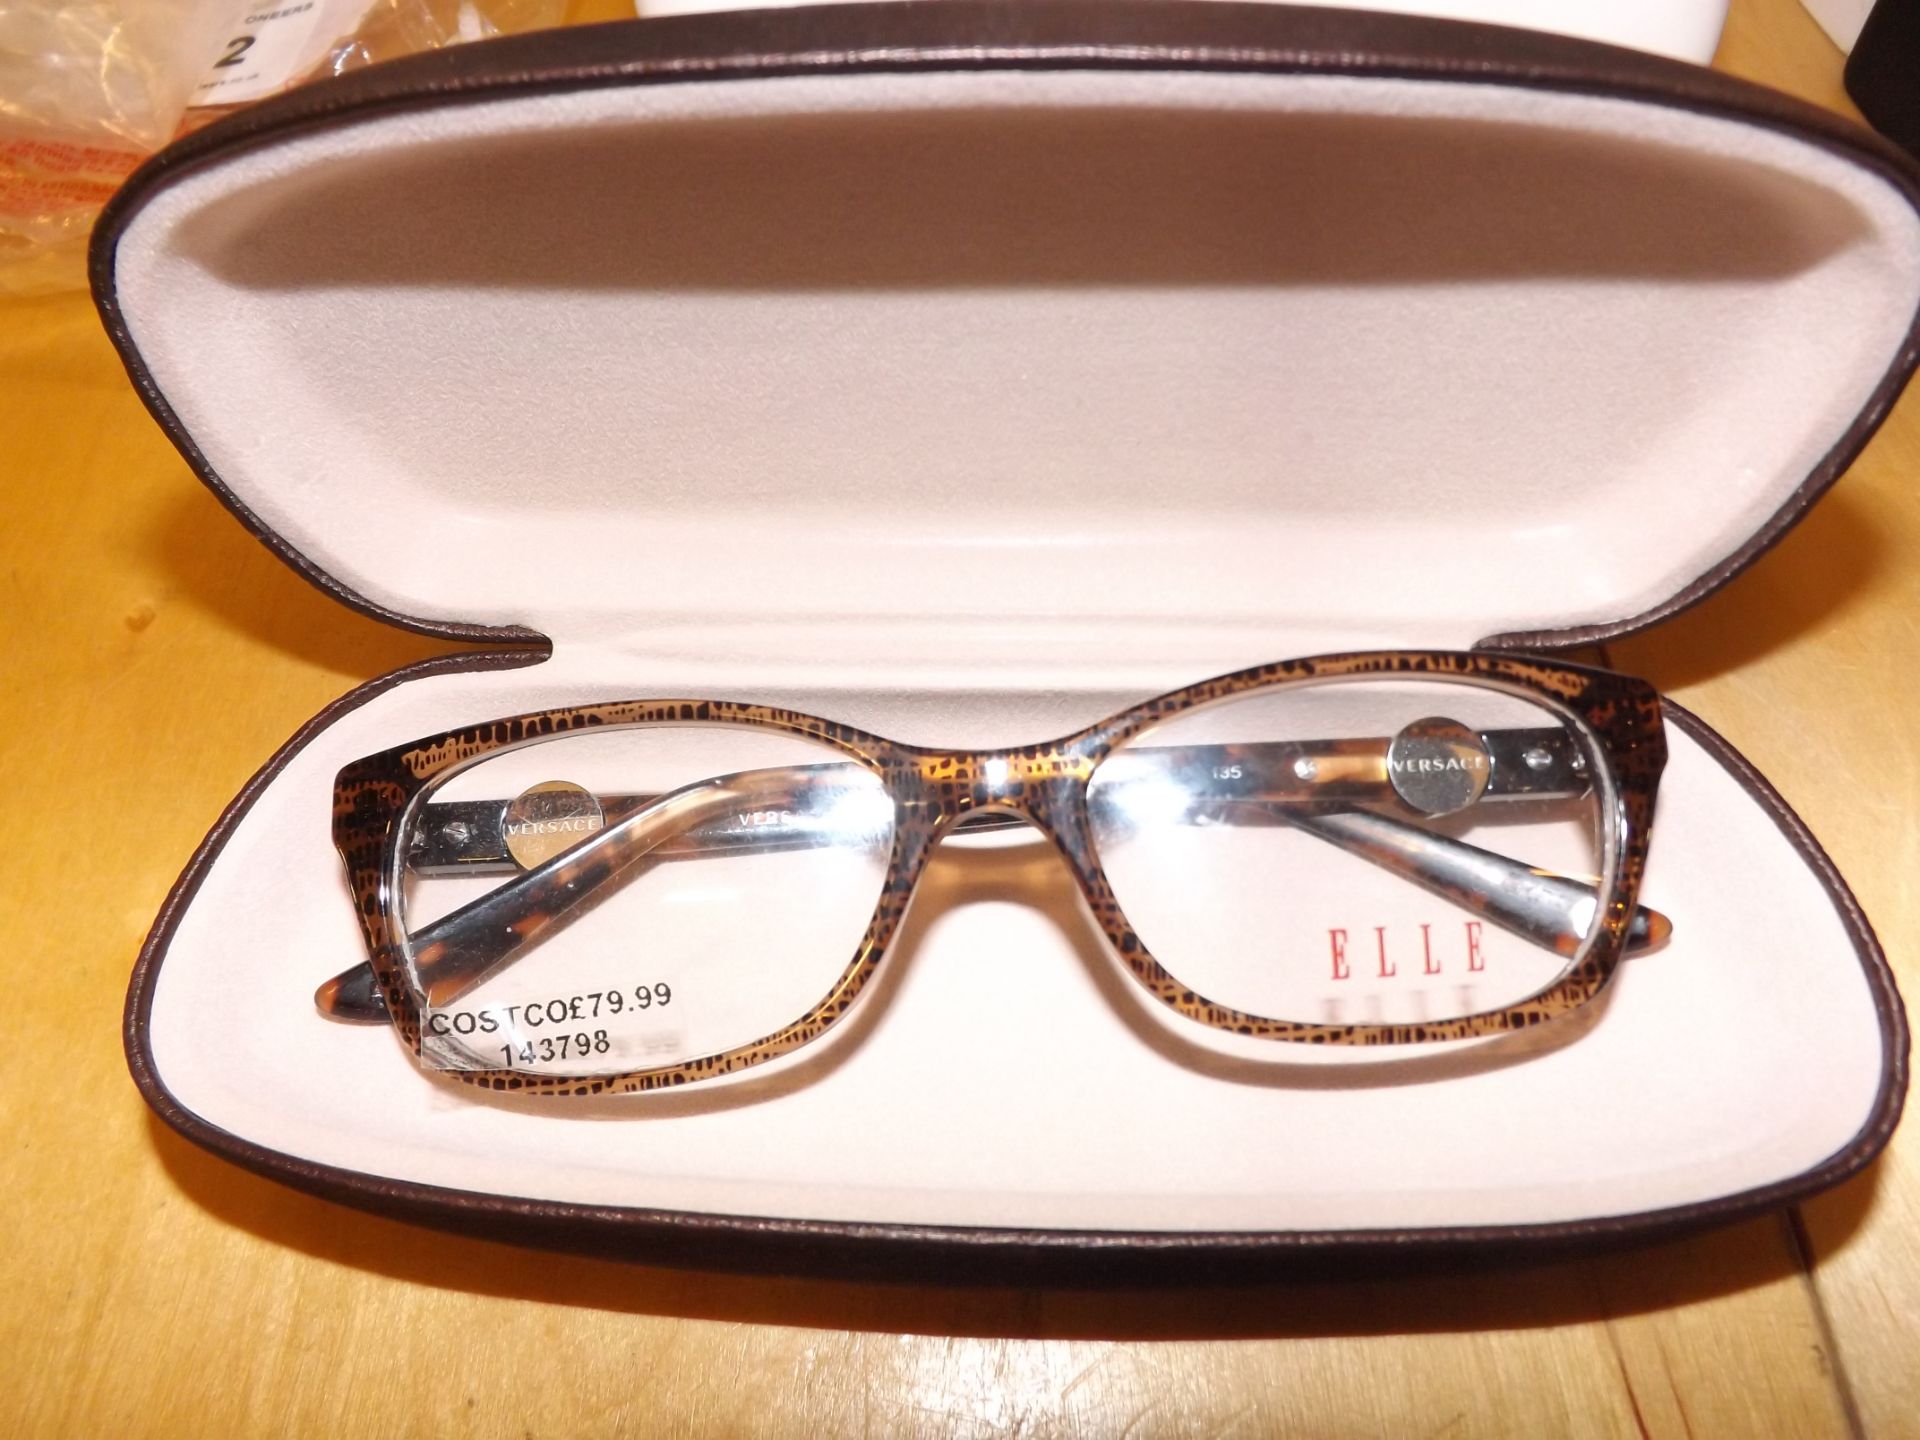 1 PAIR OF ELLE GLASSES FRAMES WITH CASE RRP £89.99